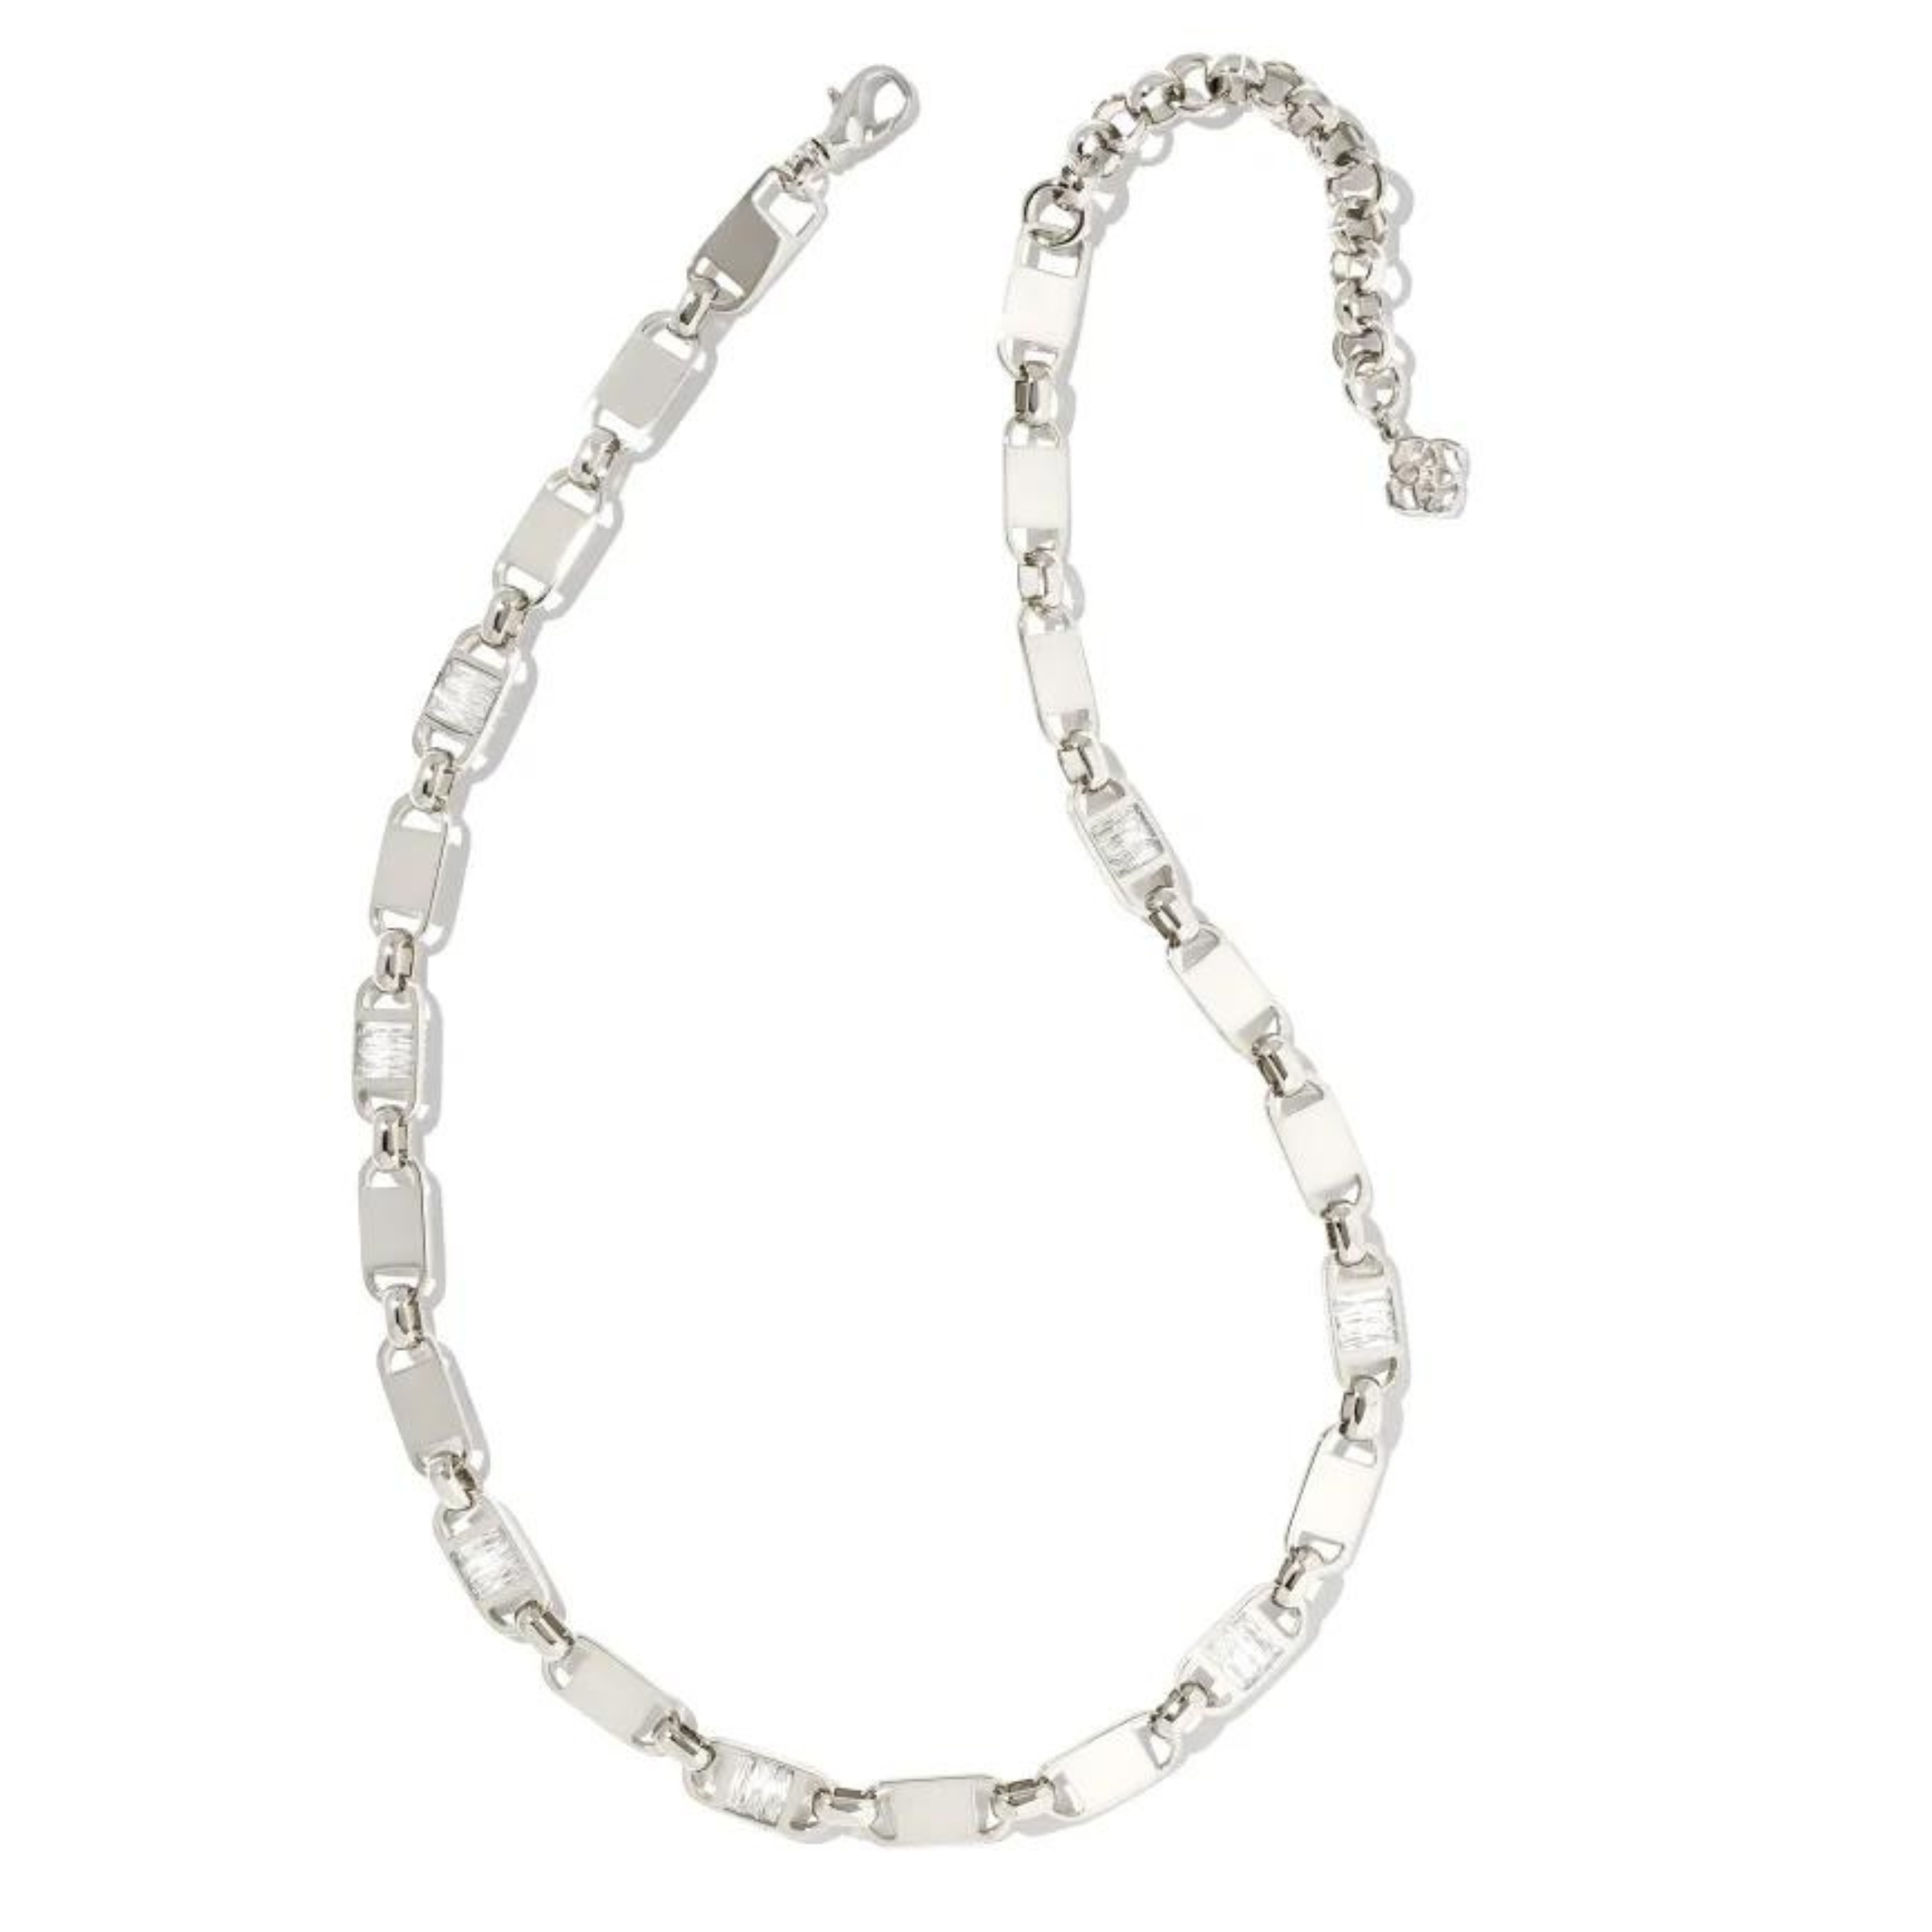 Kendra Scott | Jessie Silver Chain Necklace in White Crystal - Giddy Up Glamour Boutique